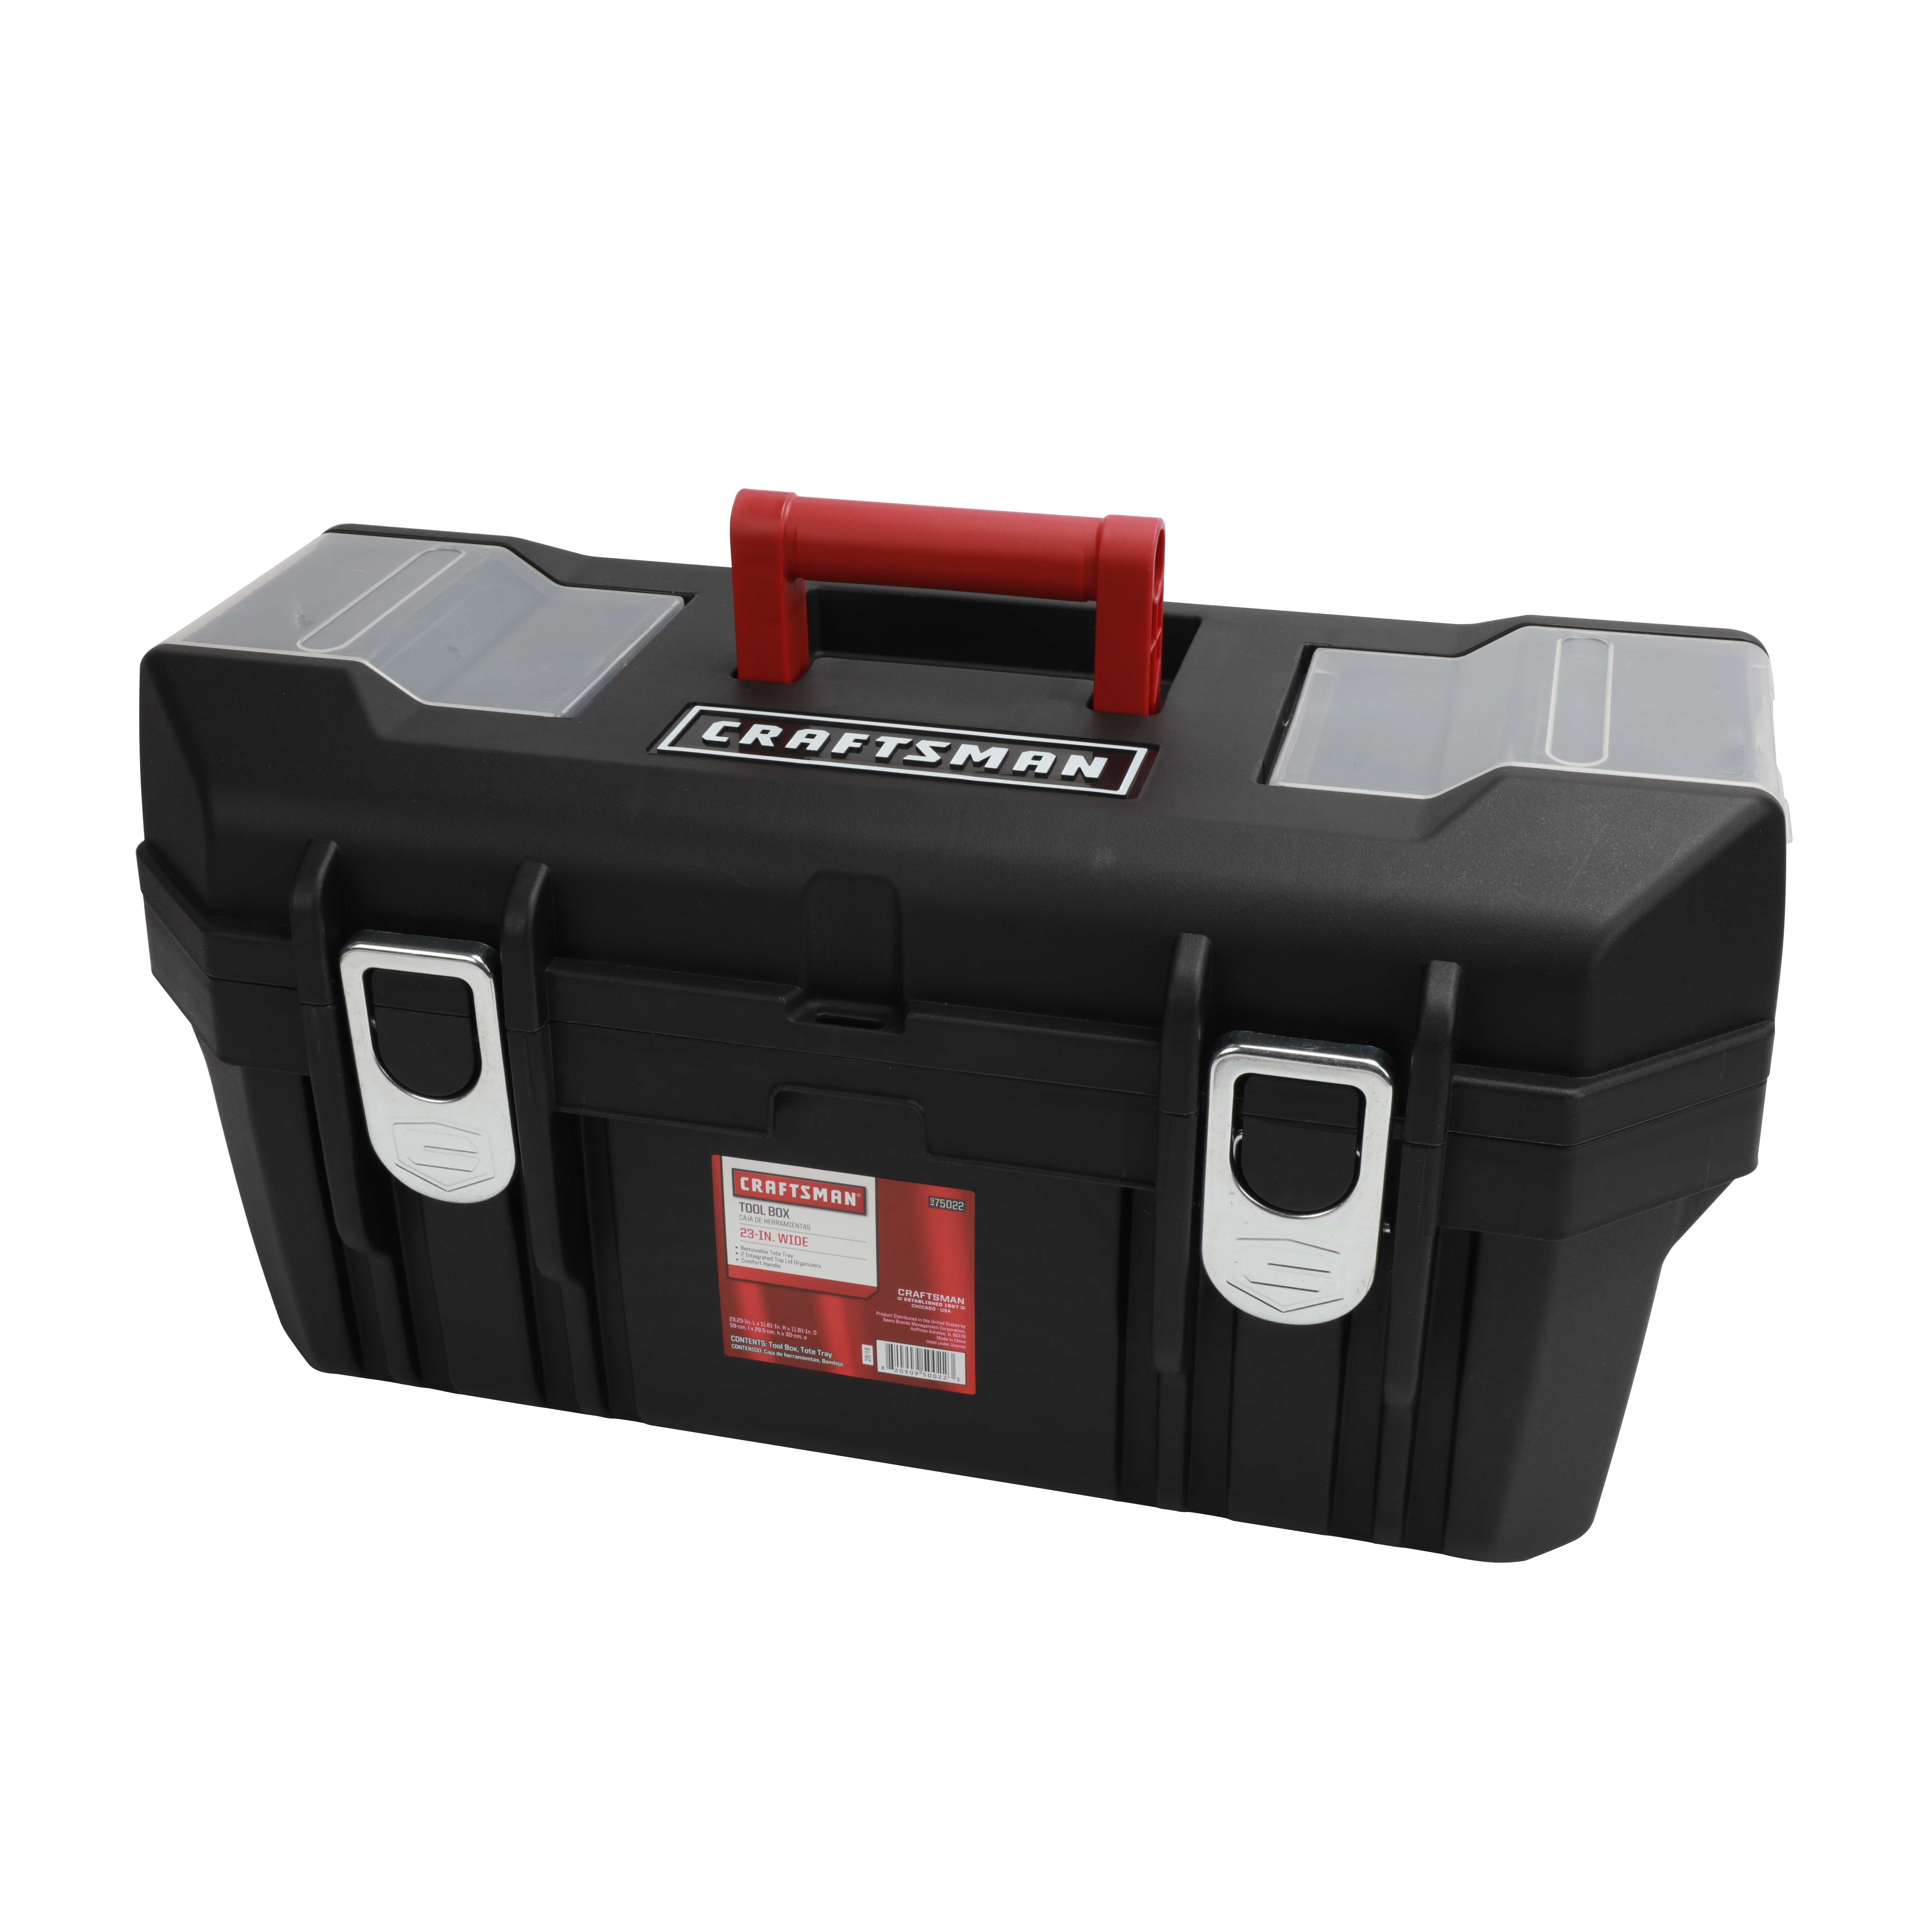 Craftsman 23" Toolbox with Tray